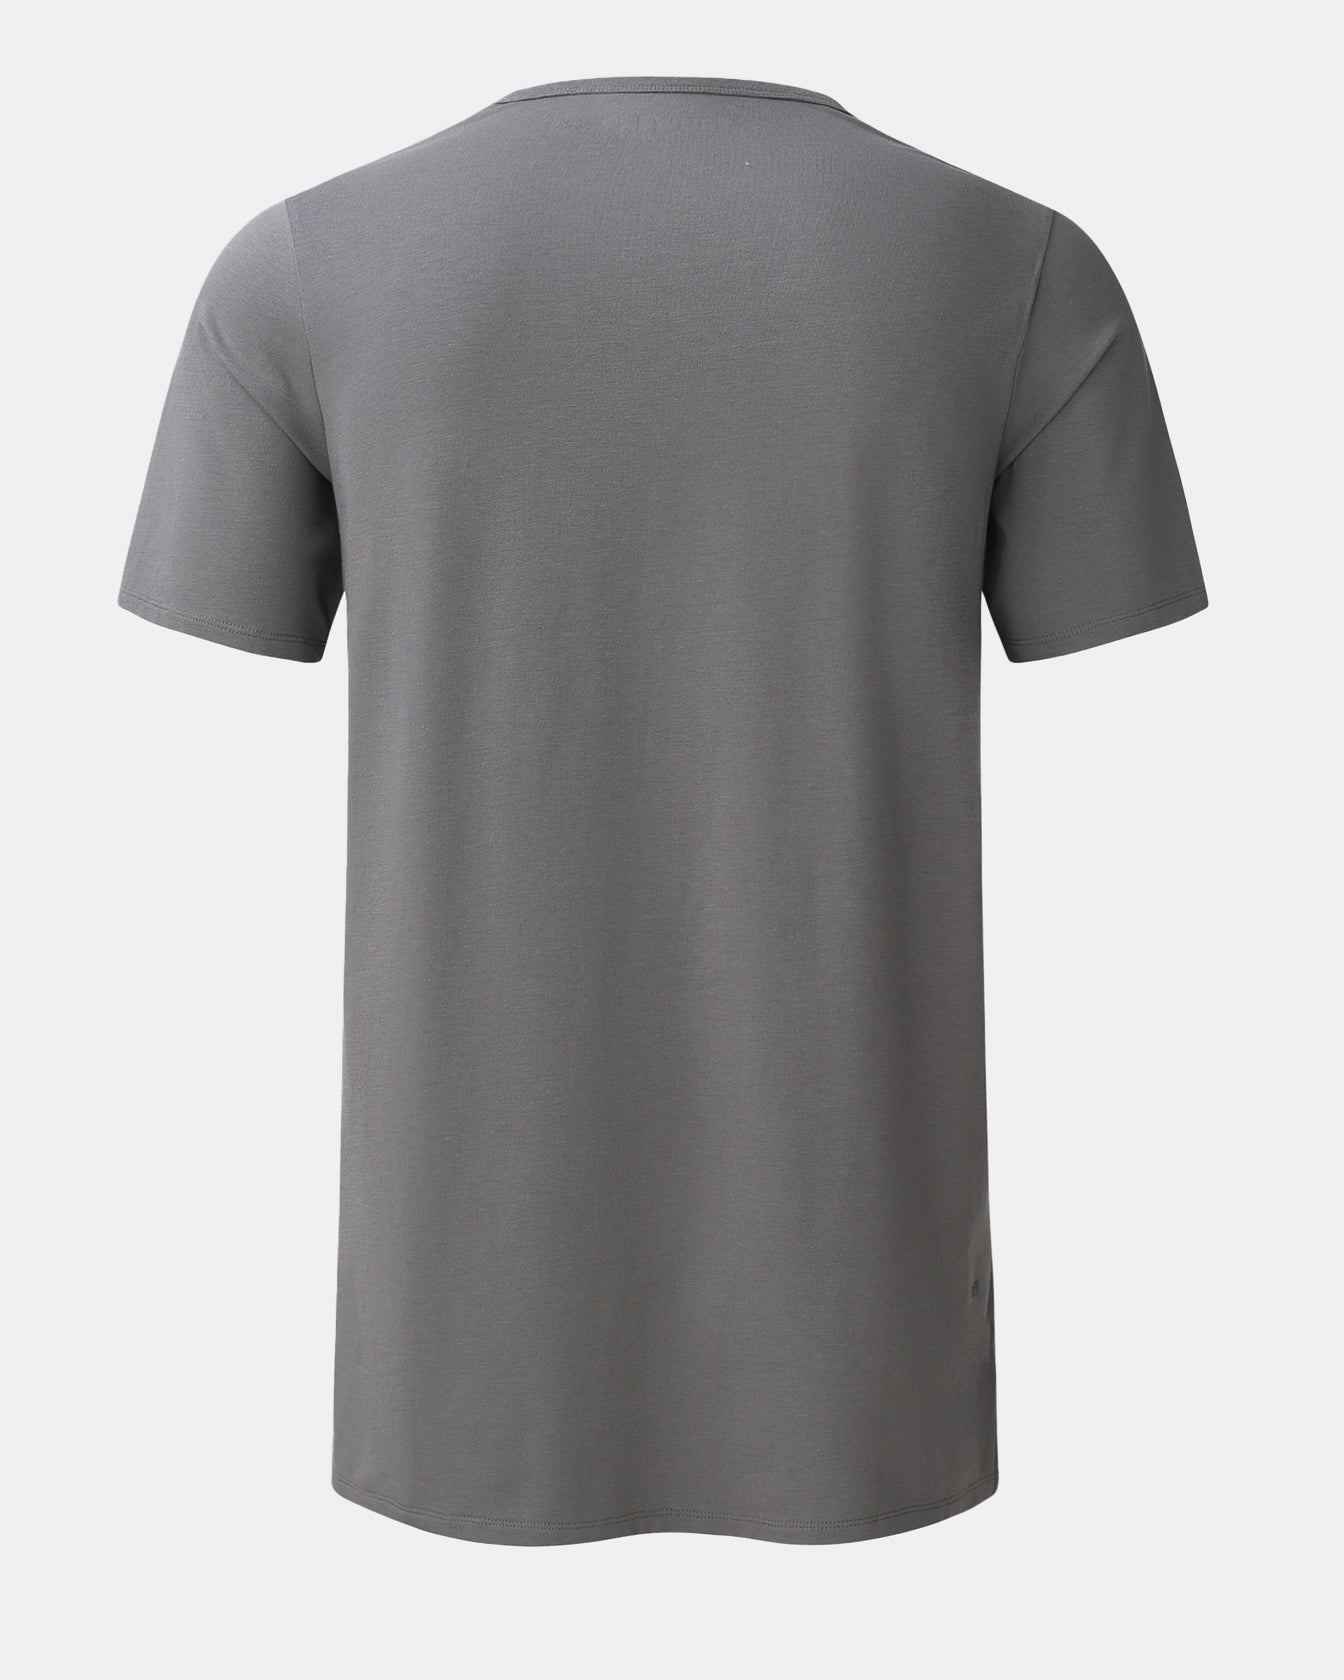 Spectacle 2.0 Charcoal T-Shirt